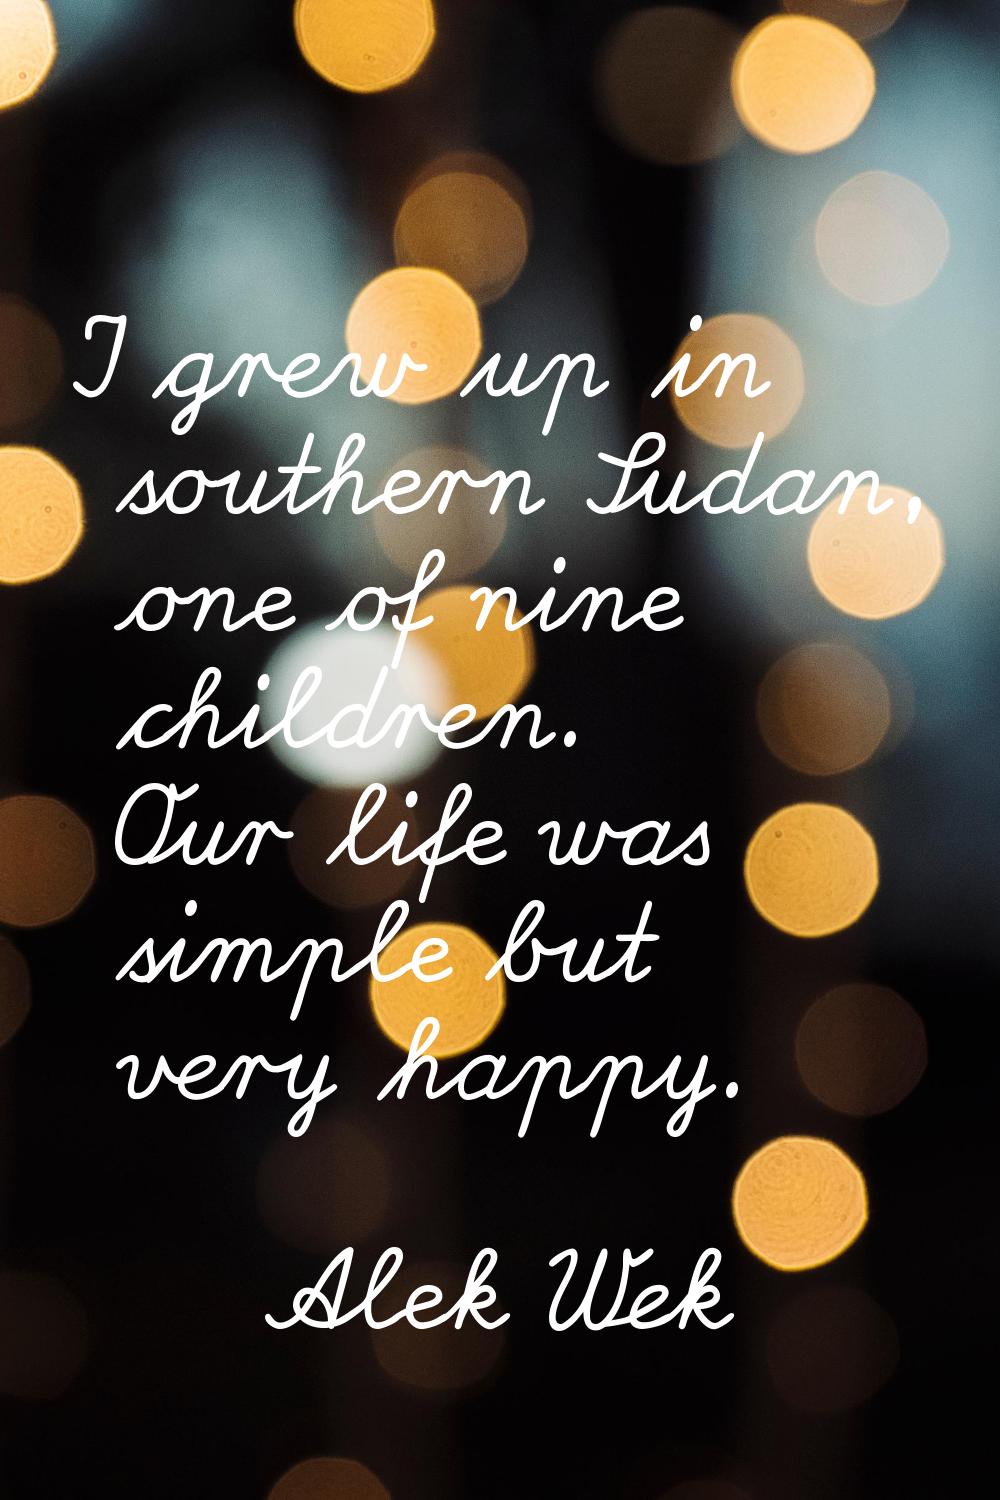 I grew up in southern Sudan, one of nine children. Our life was simple but very happy.